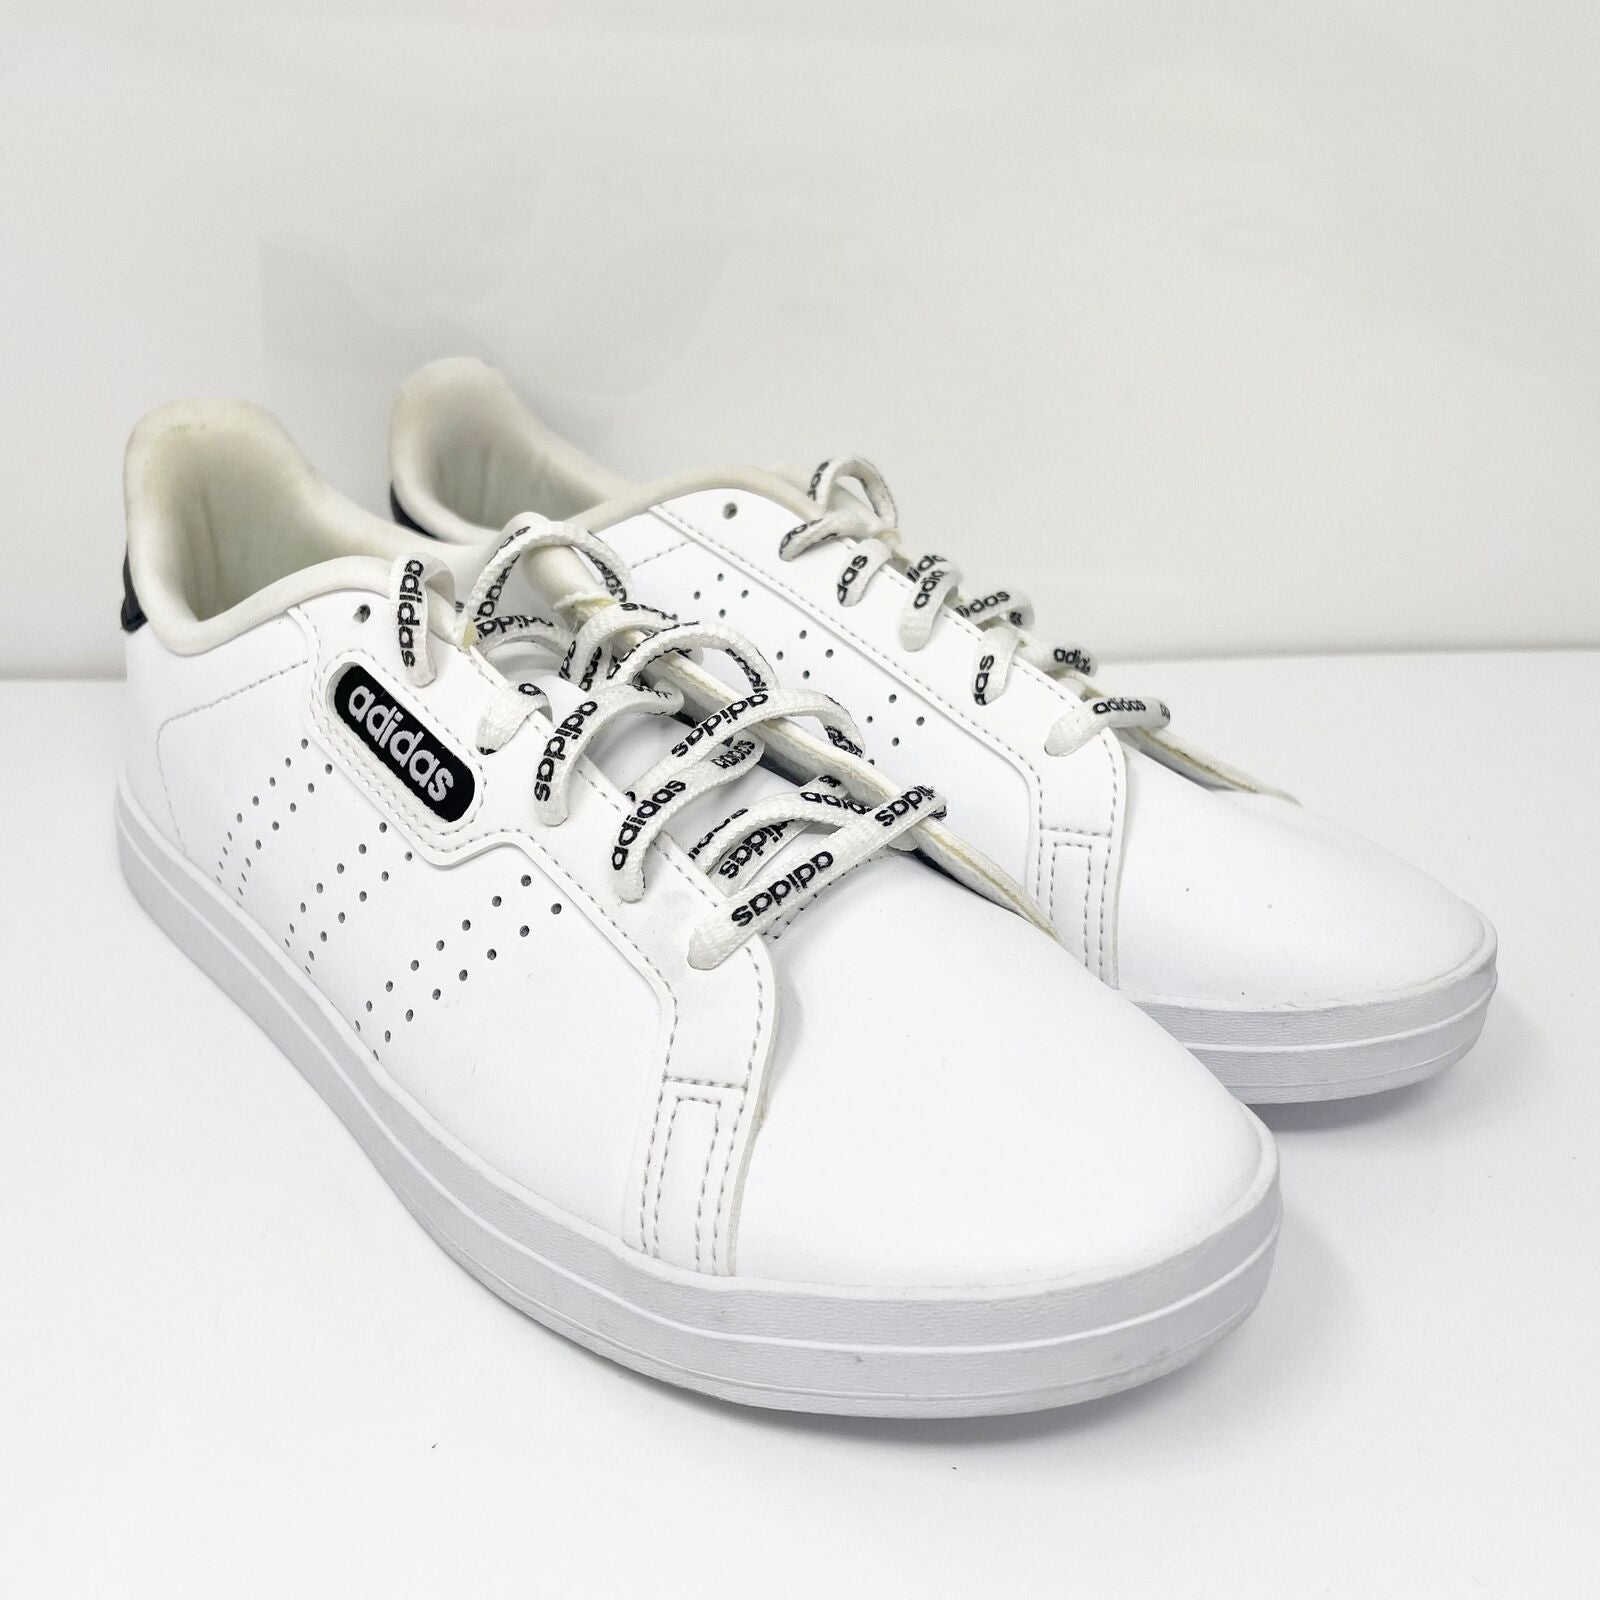 Adidas Womens Courtpoint FY8415 White Casual Shoes Sneakers Size 7 ...